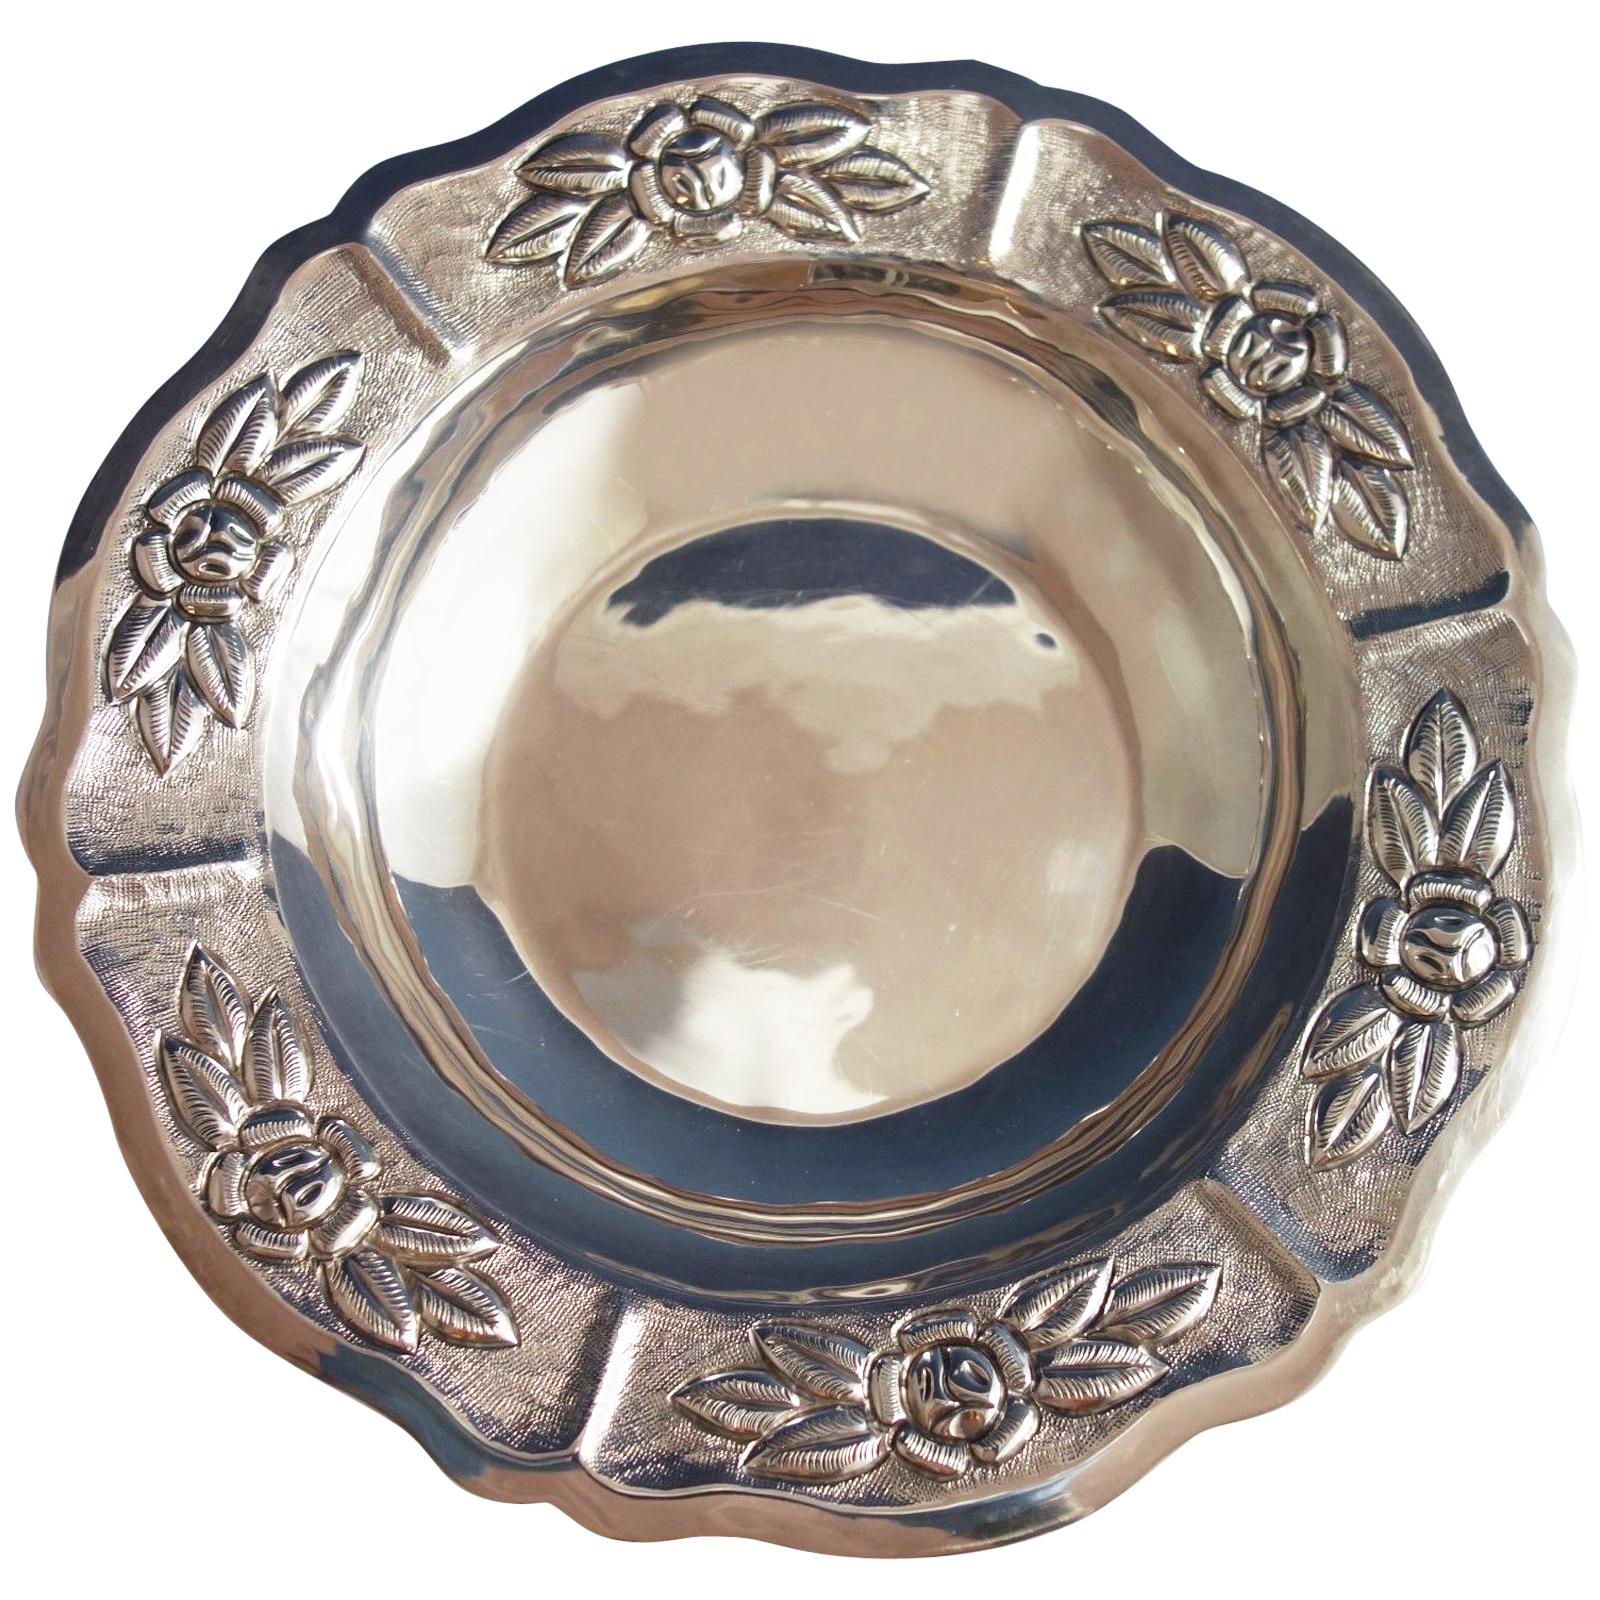 Aztec Rose by Maciel Mexican Mexico Sterling Silver Fruit Bowl #6522/5